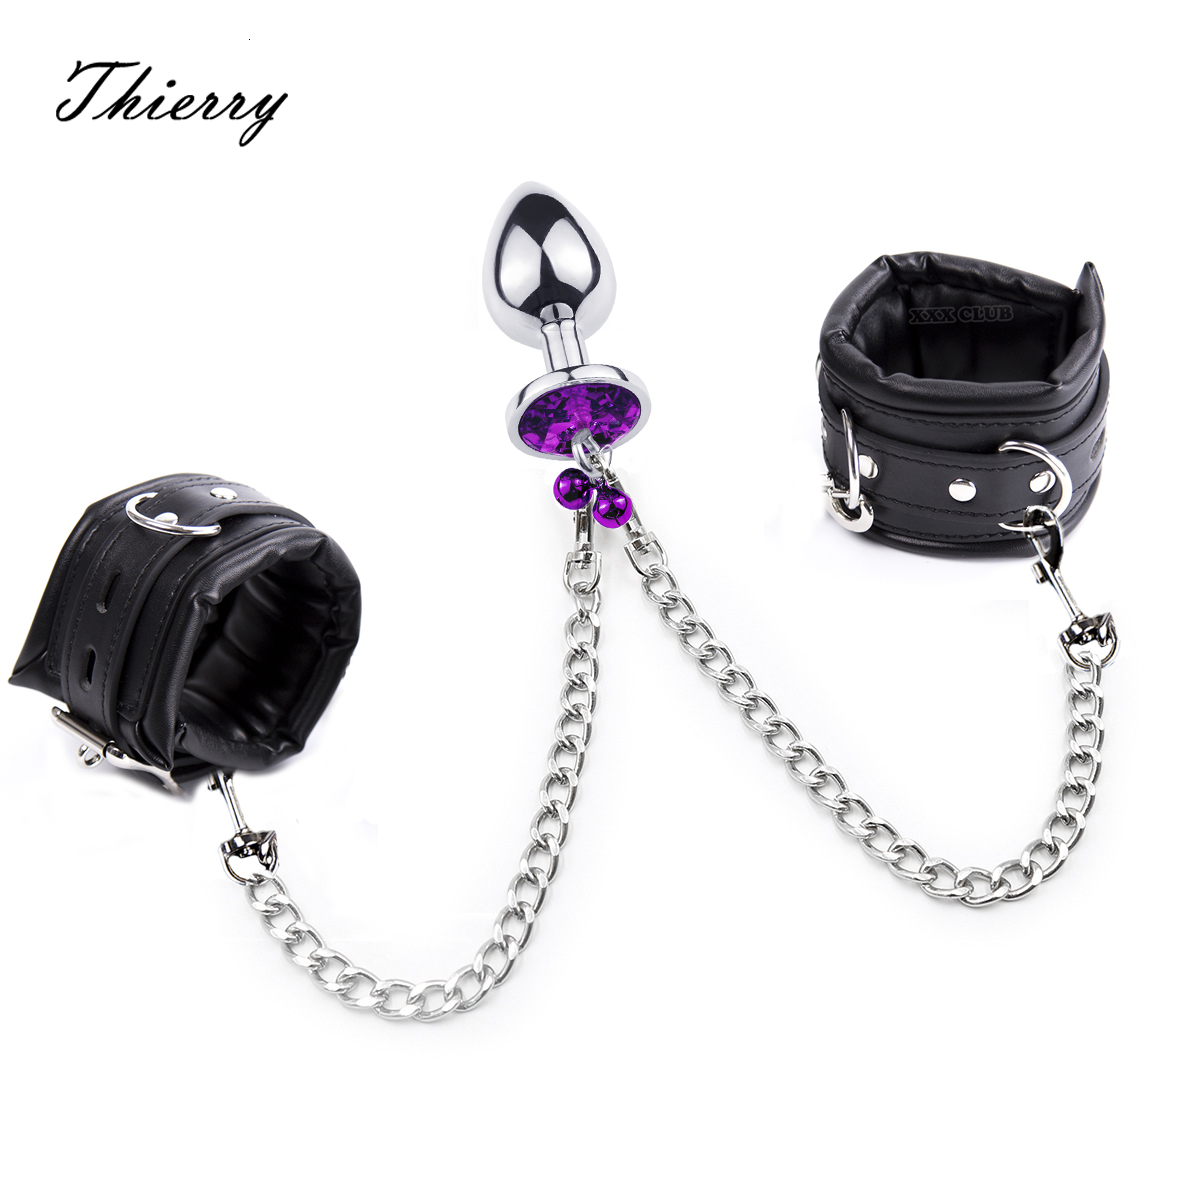 

Adult Toys Thierry Anal Plug to Wrist Bondage Kit Gay Fetish Tail Plug Handcuffs Adult Games Product Bdsm Sex Toys for Men Women Restraints 230202